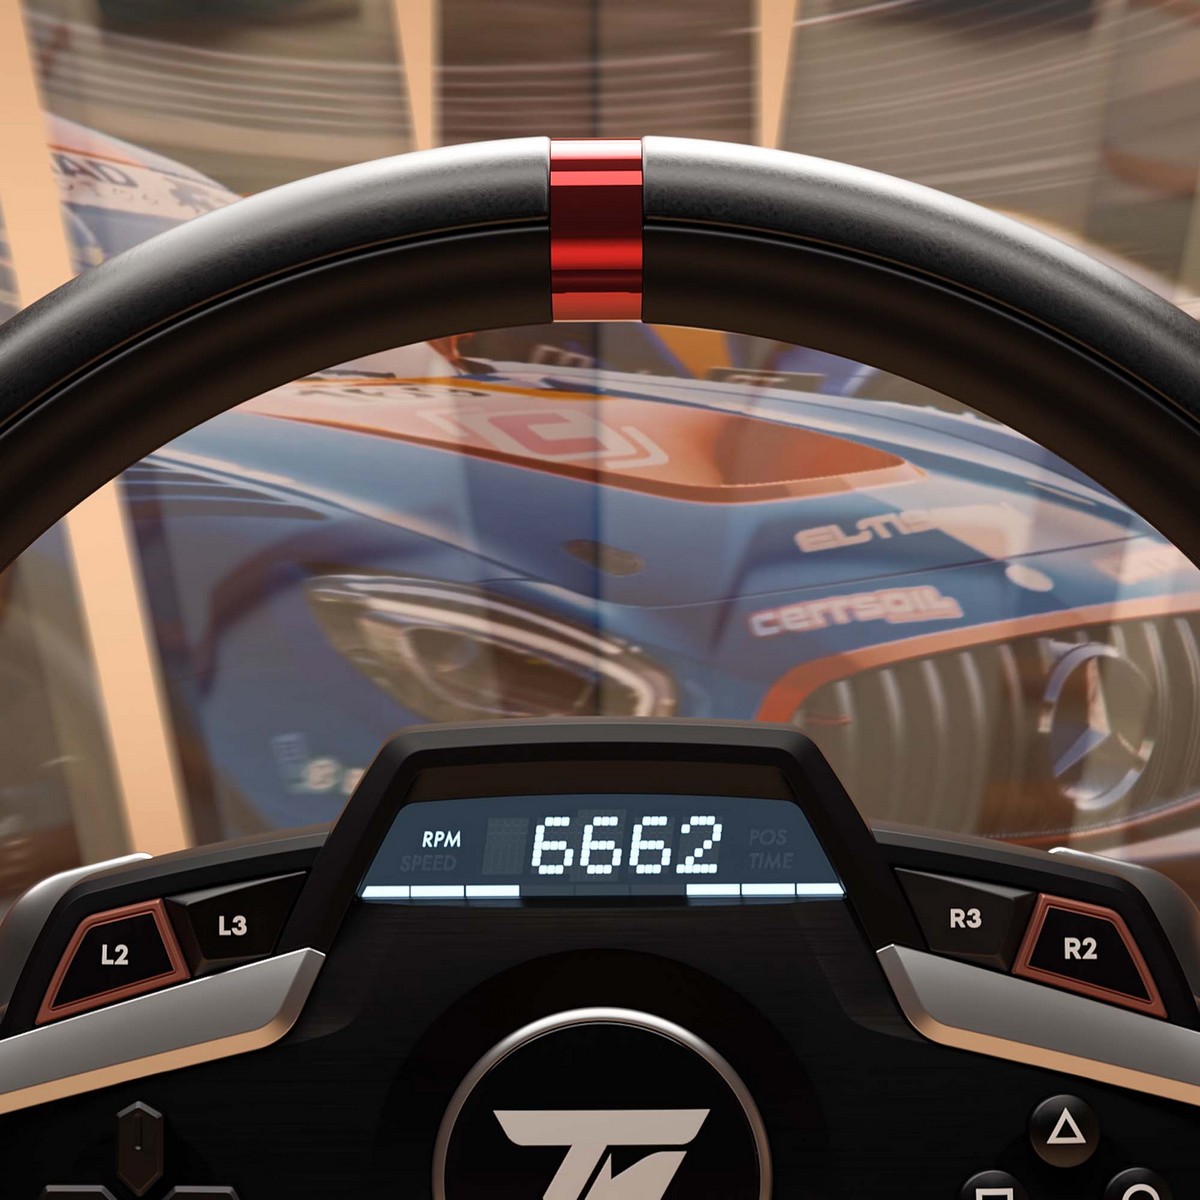 Thrustmaster's T248 now available to pre-order for Xbox!